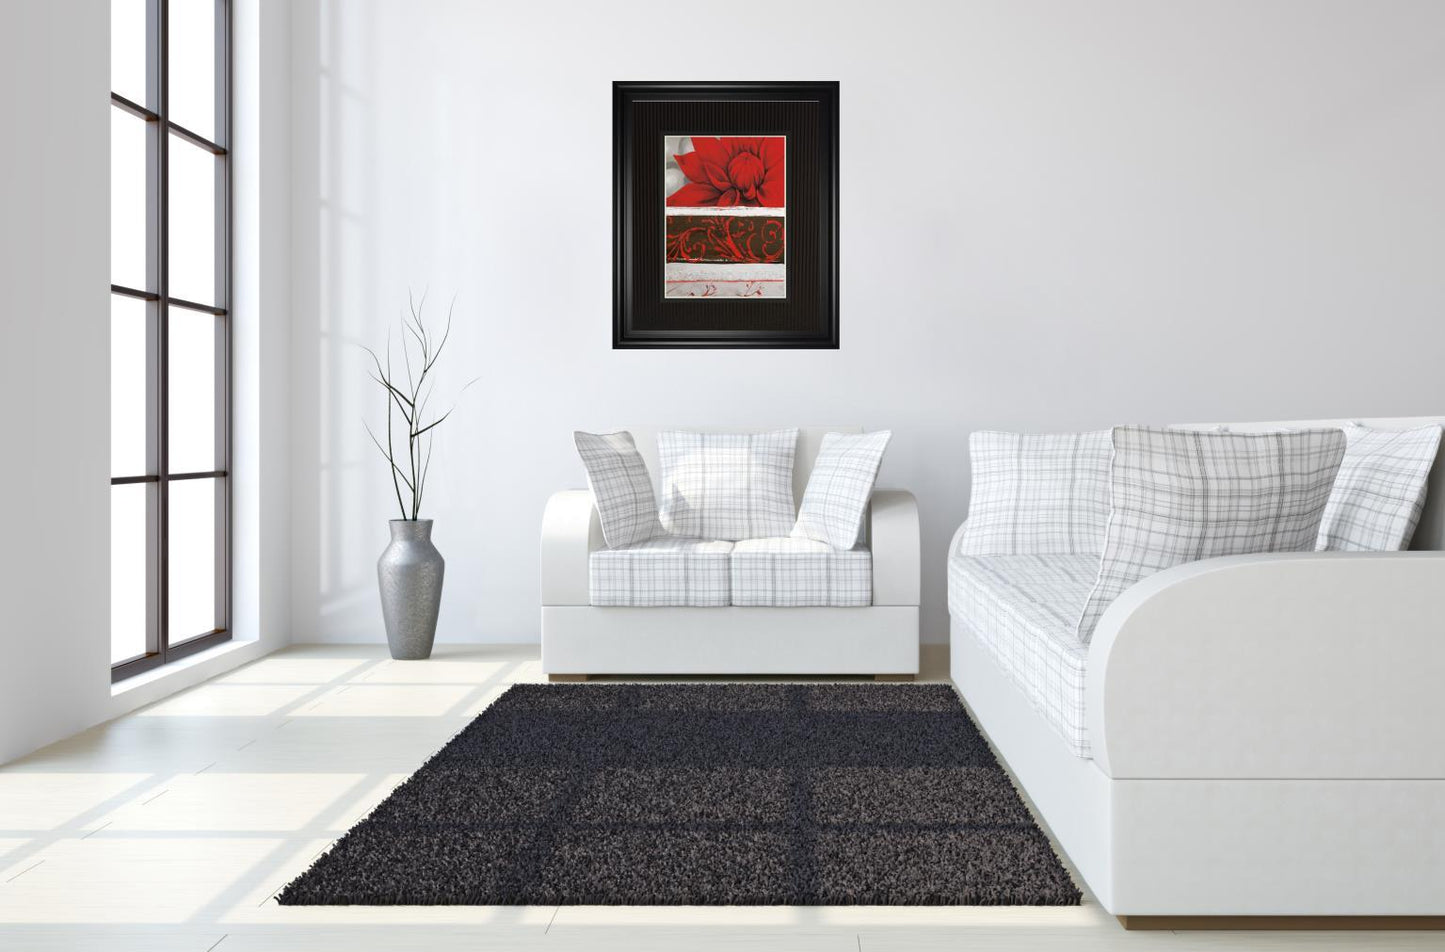 Sumptuous Red By Jasmin Zara Copley - Framed Print Wall Art - Red